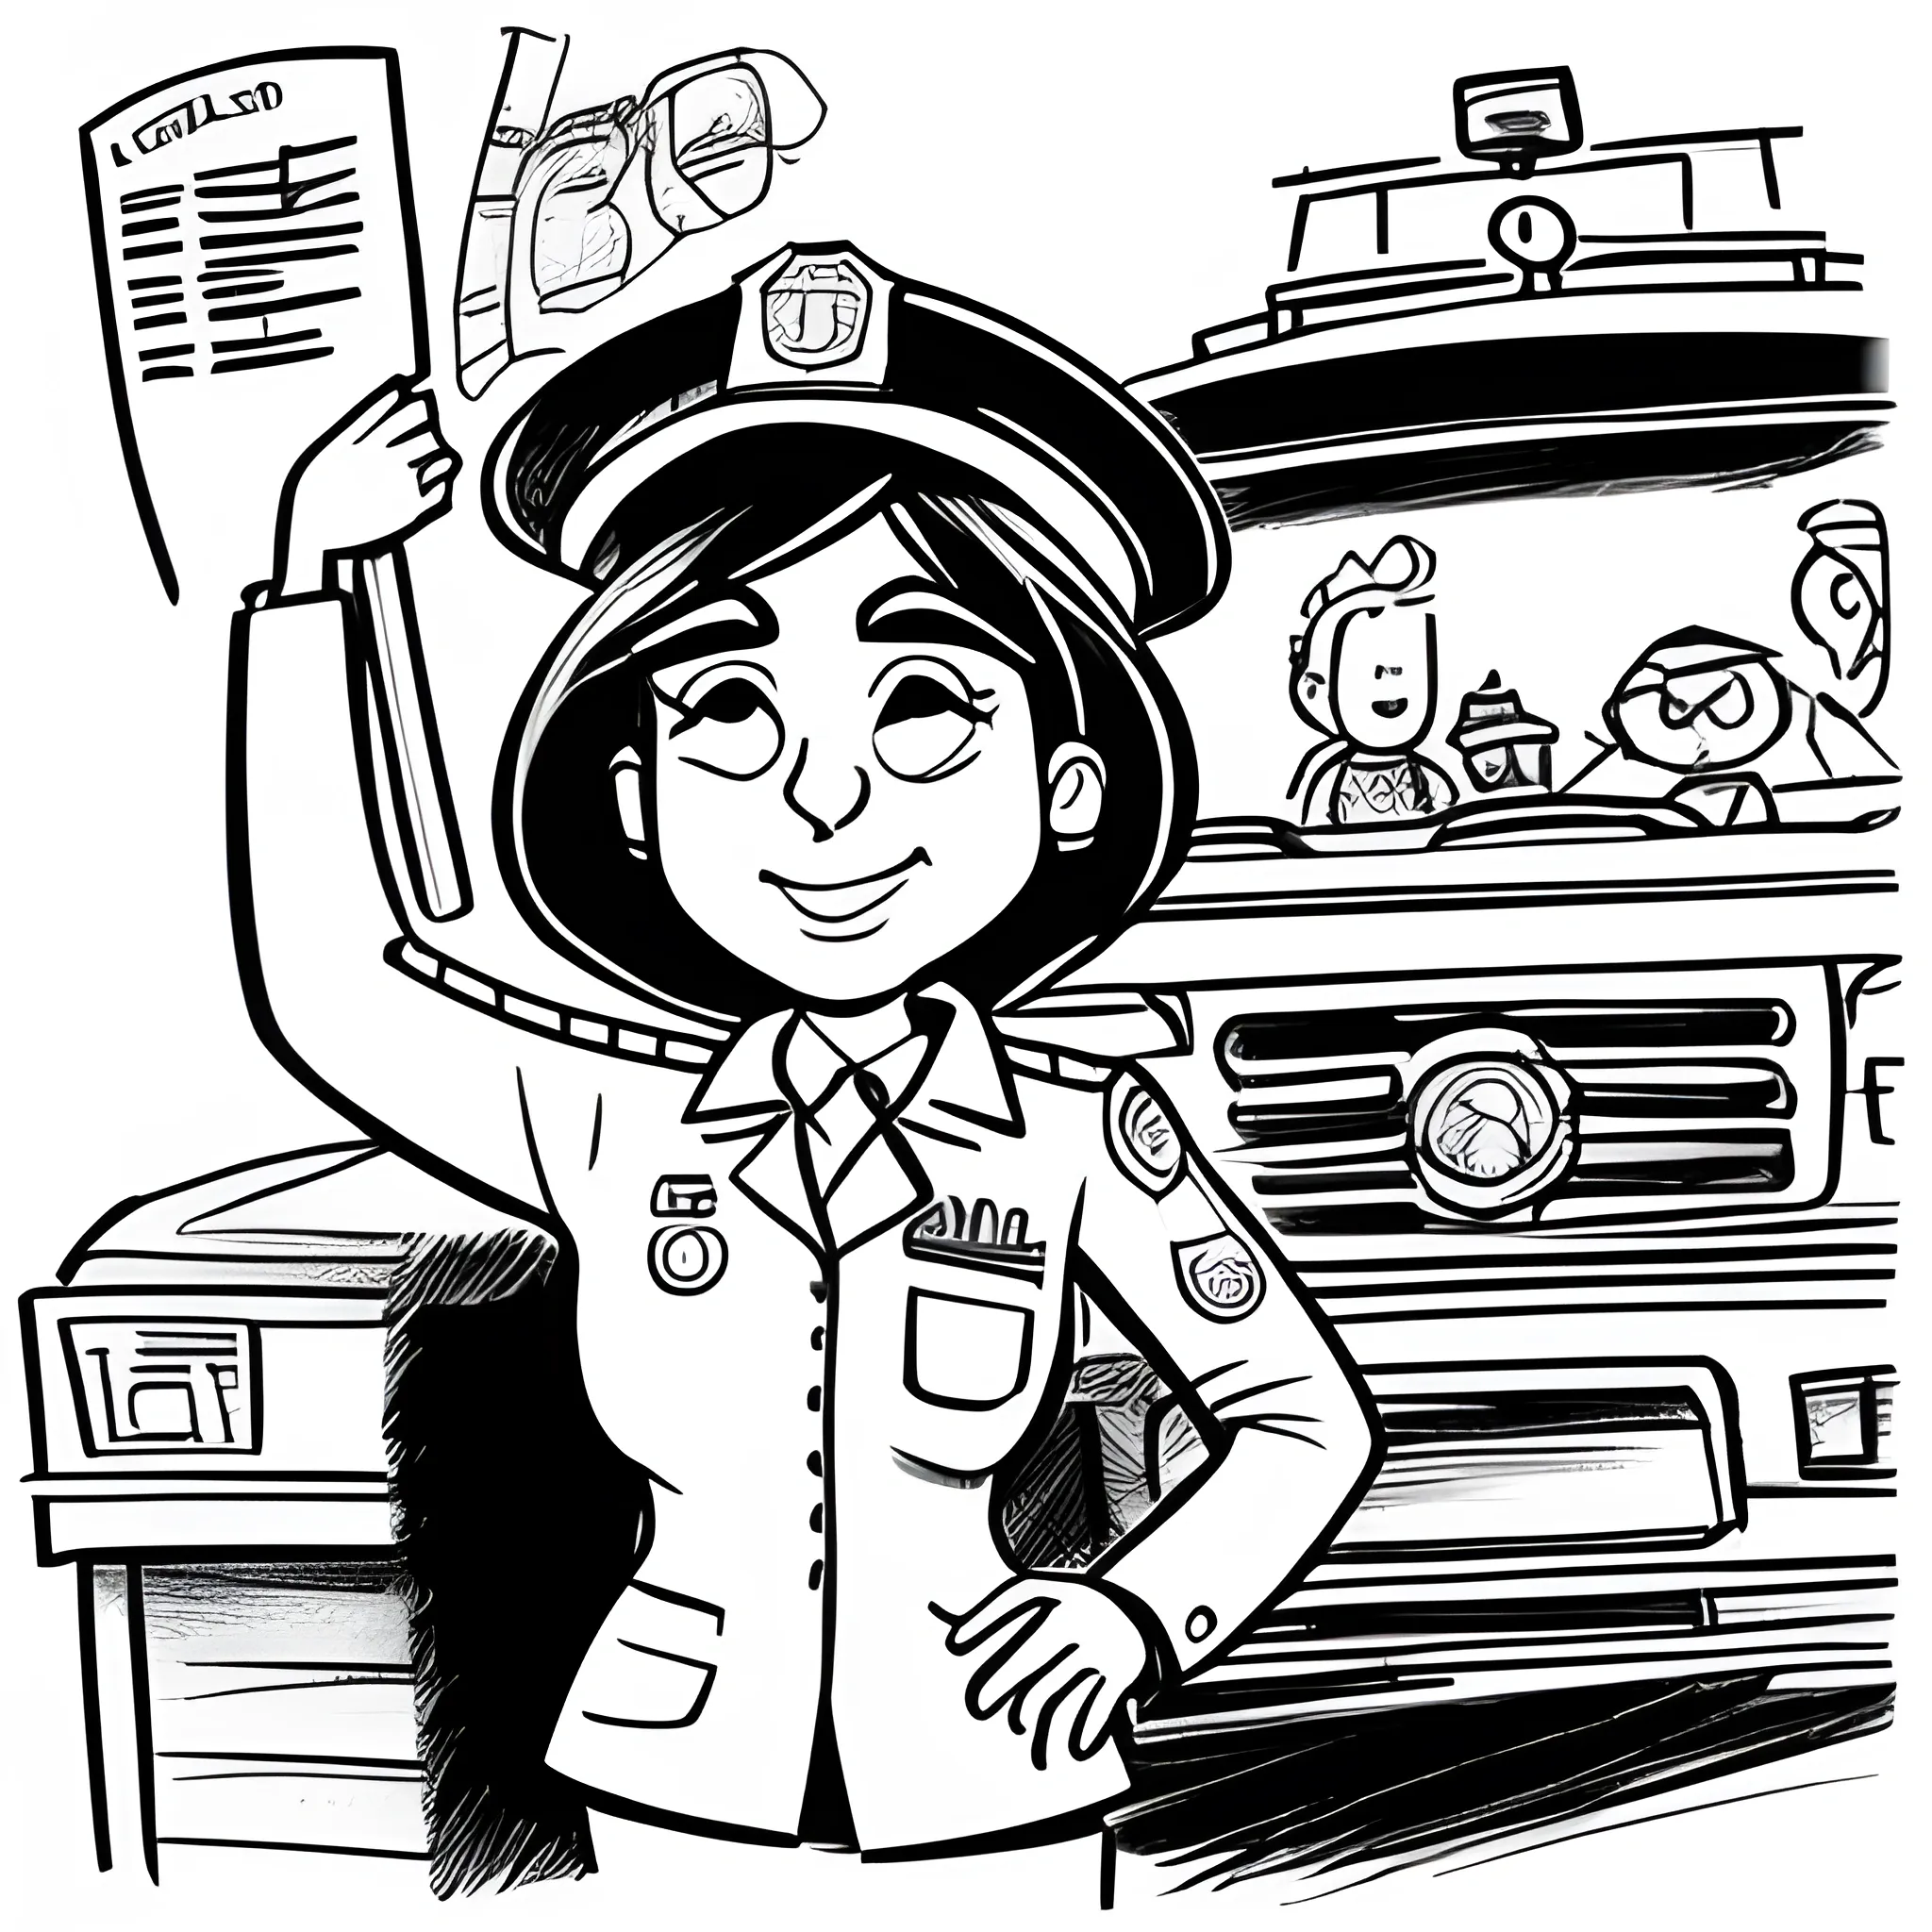 Sketch of lady police